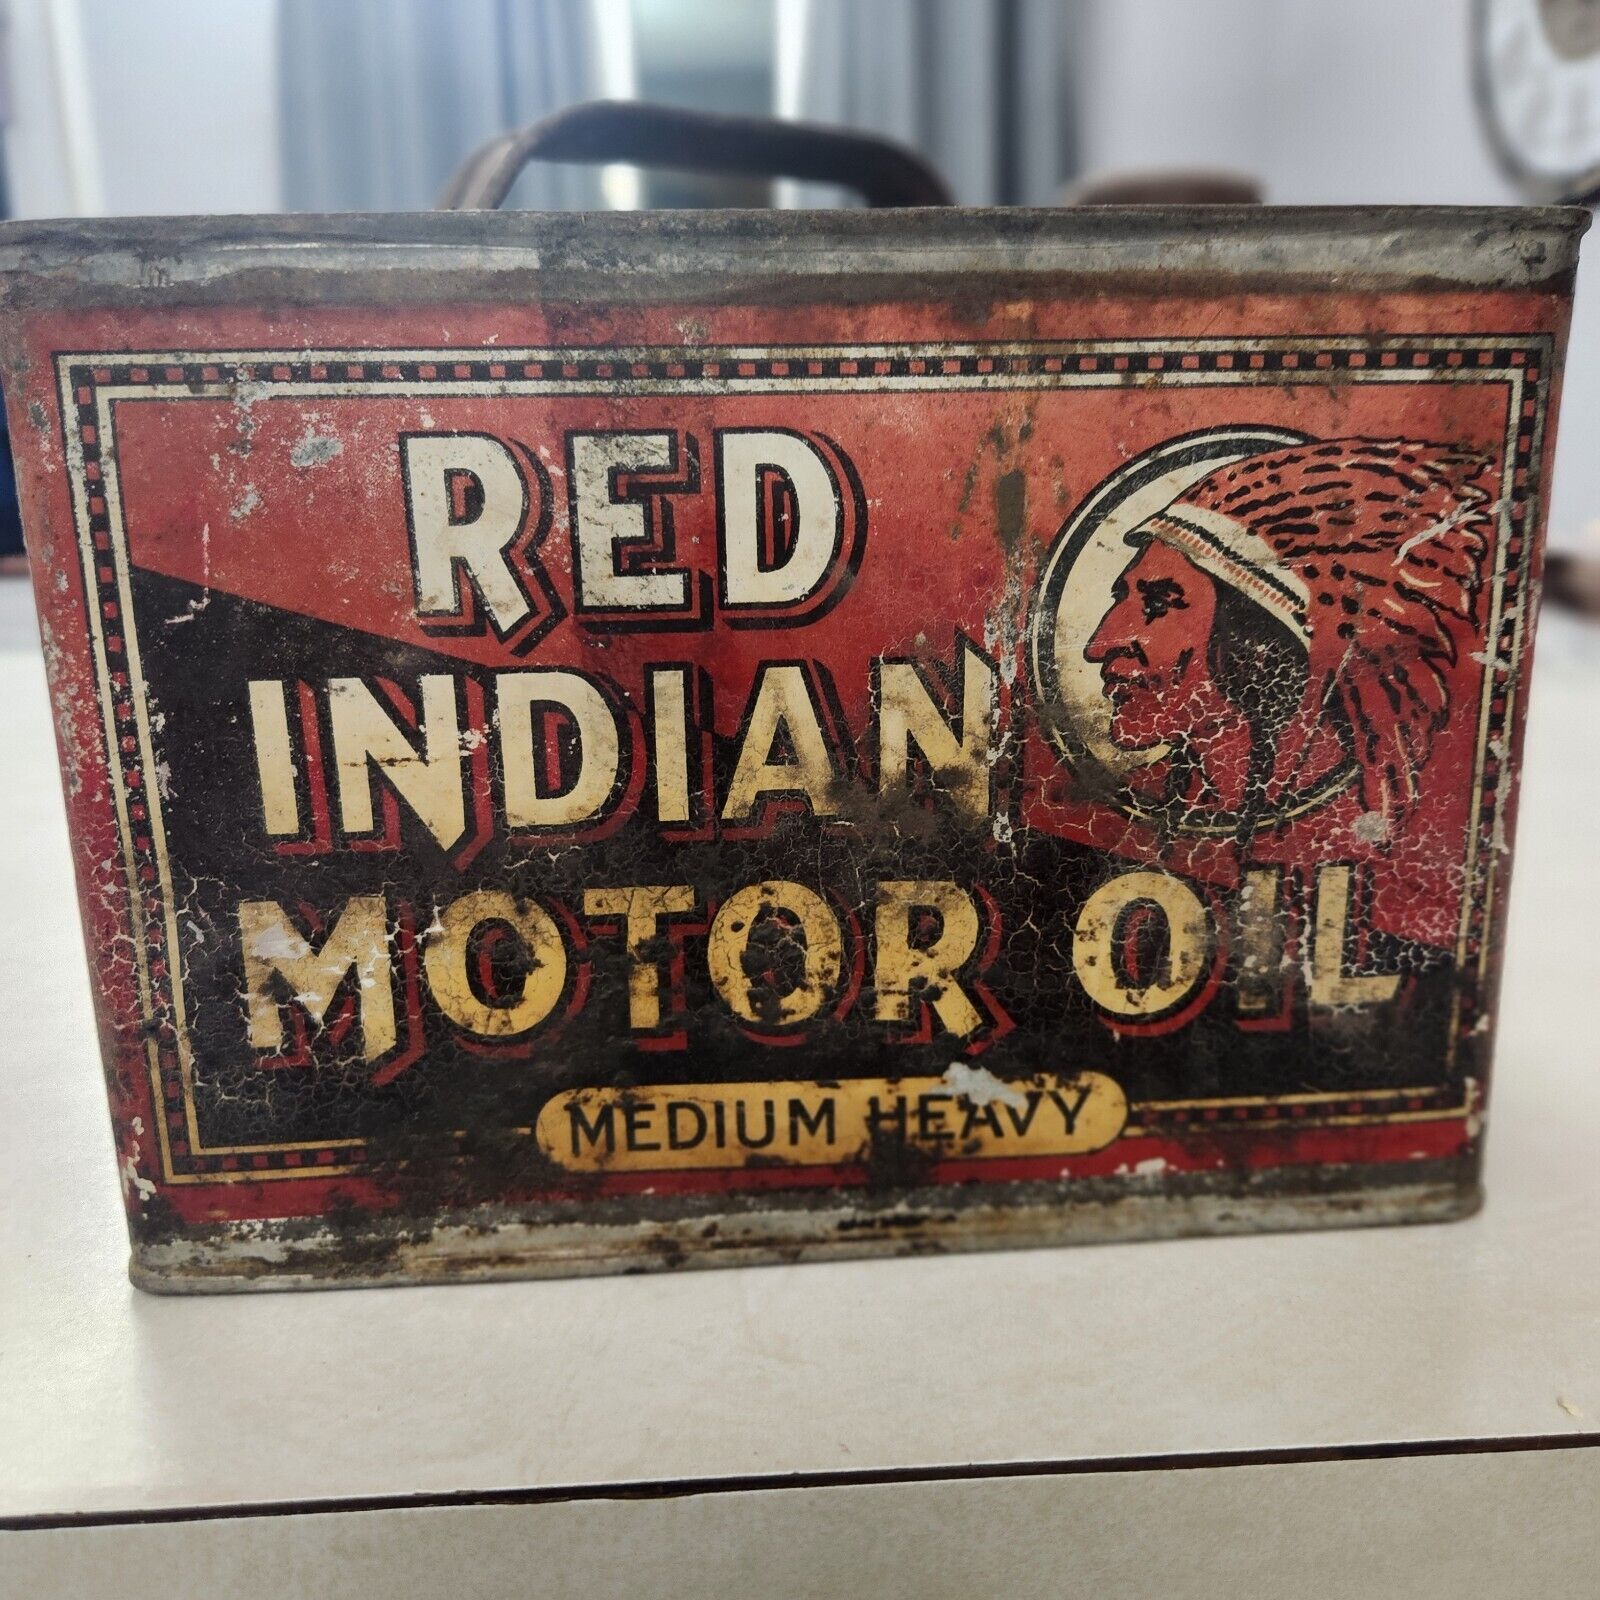 Red Indian Motor Oil 1 Gallon Can